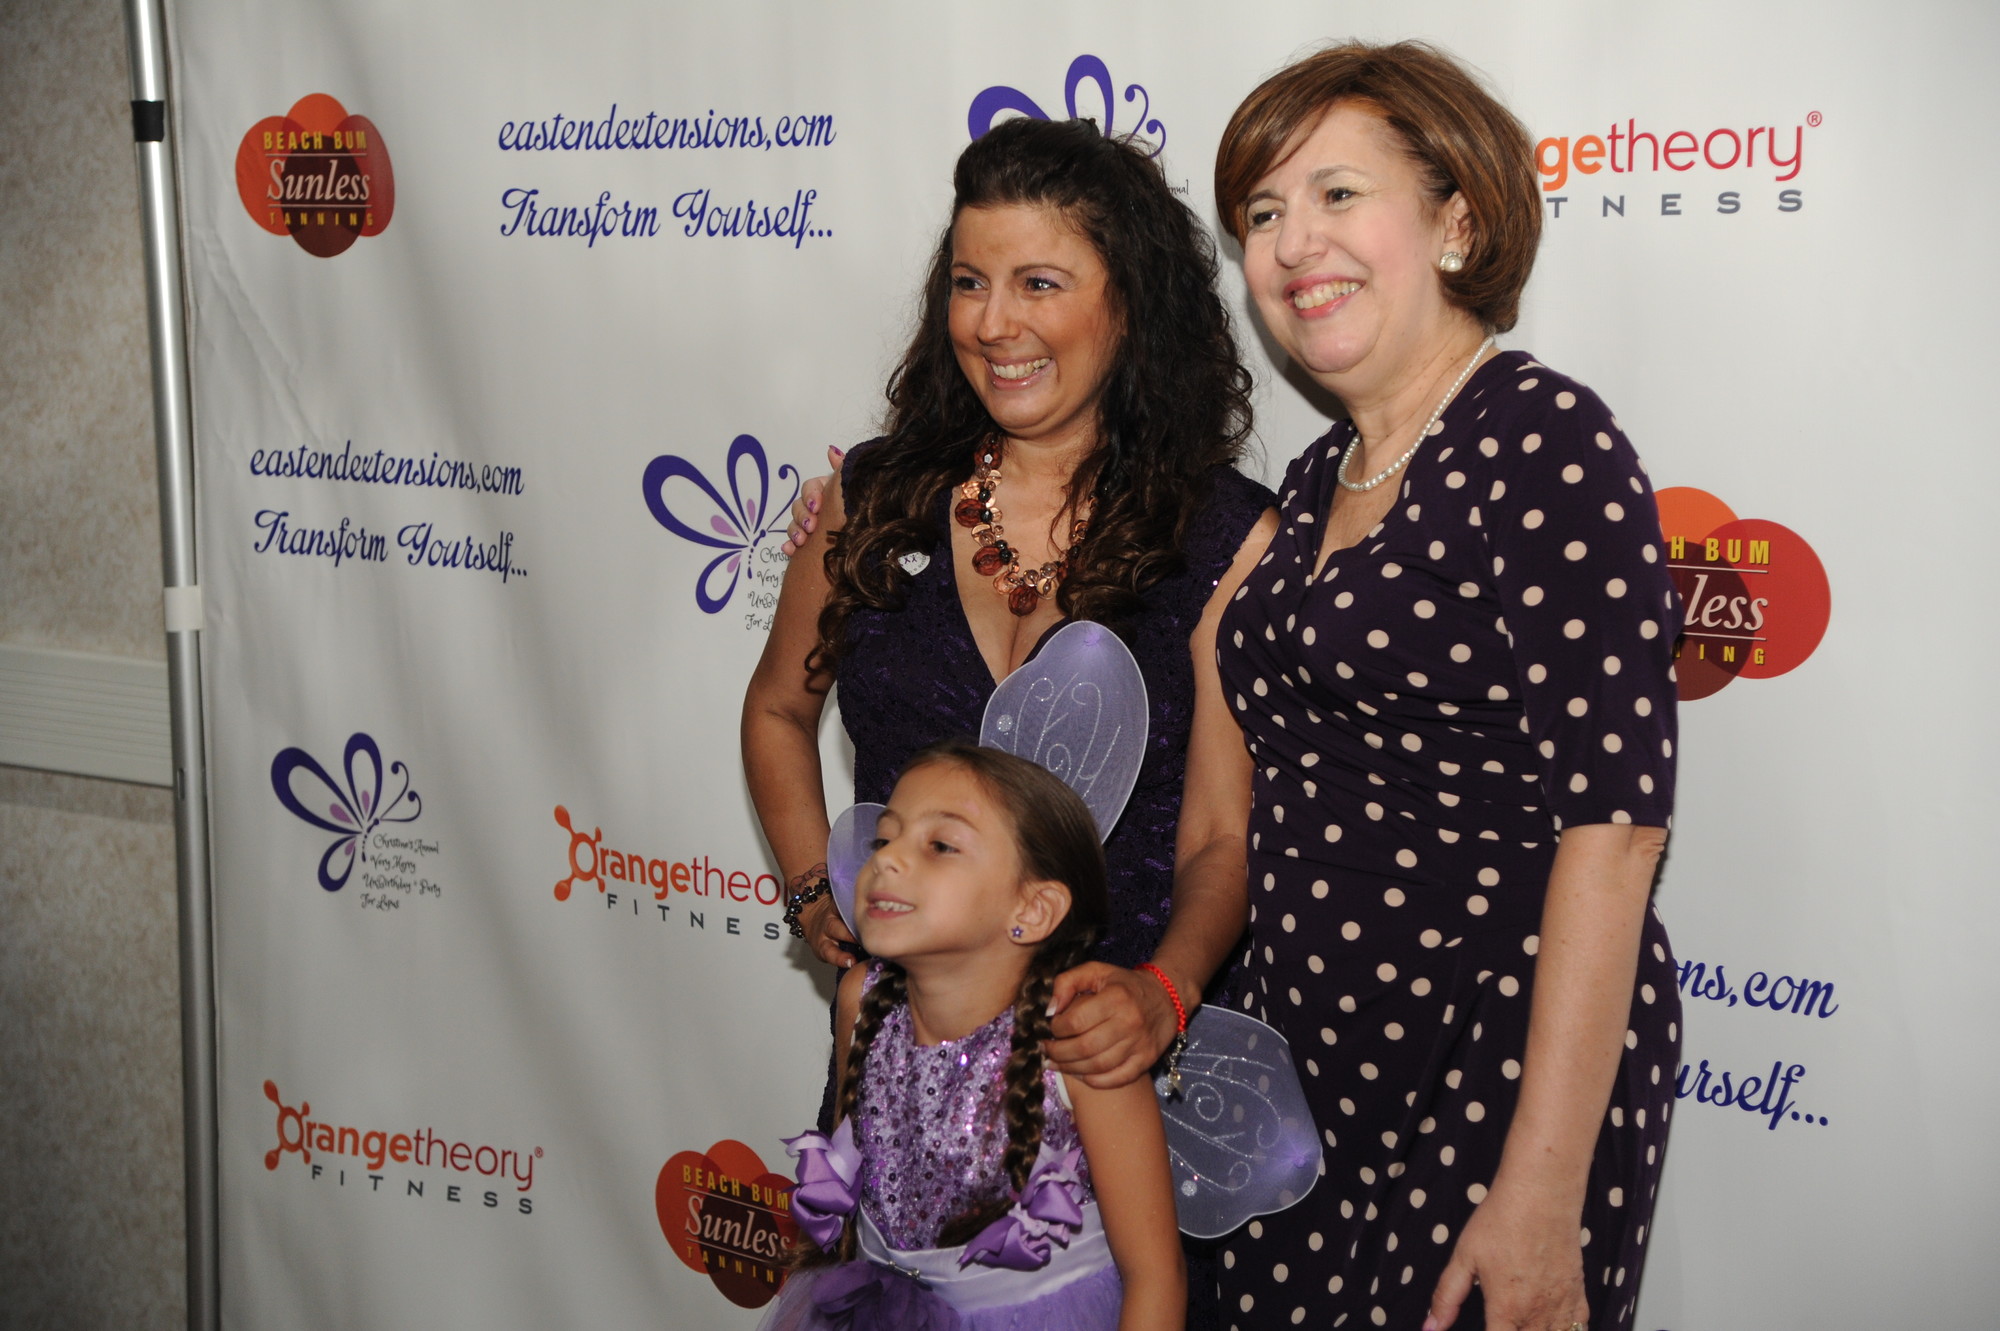 Christine Miserandino (left) poses with her daughter Olivia and her mother Janet